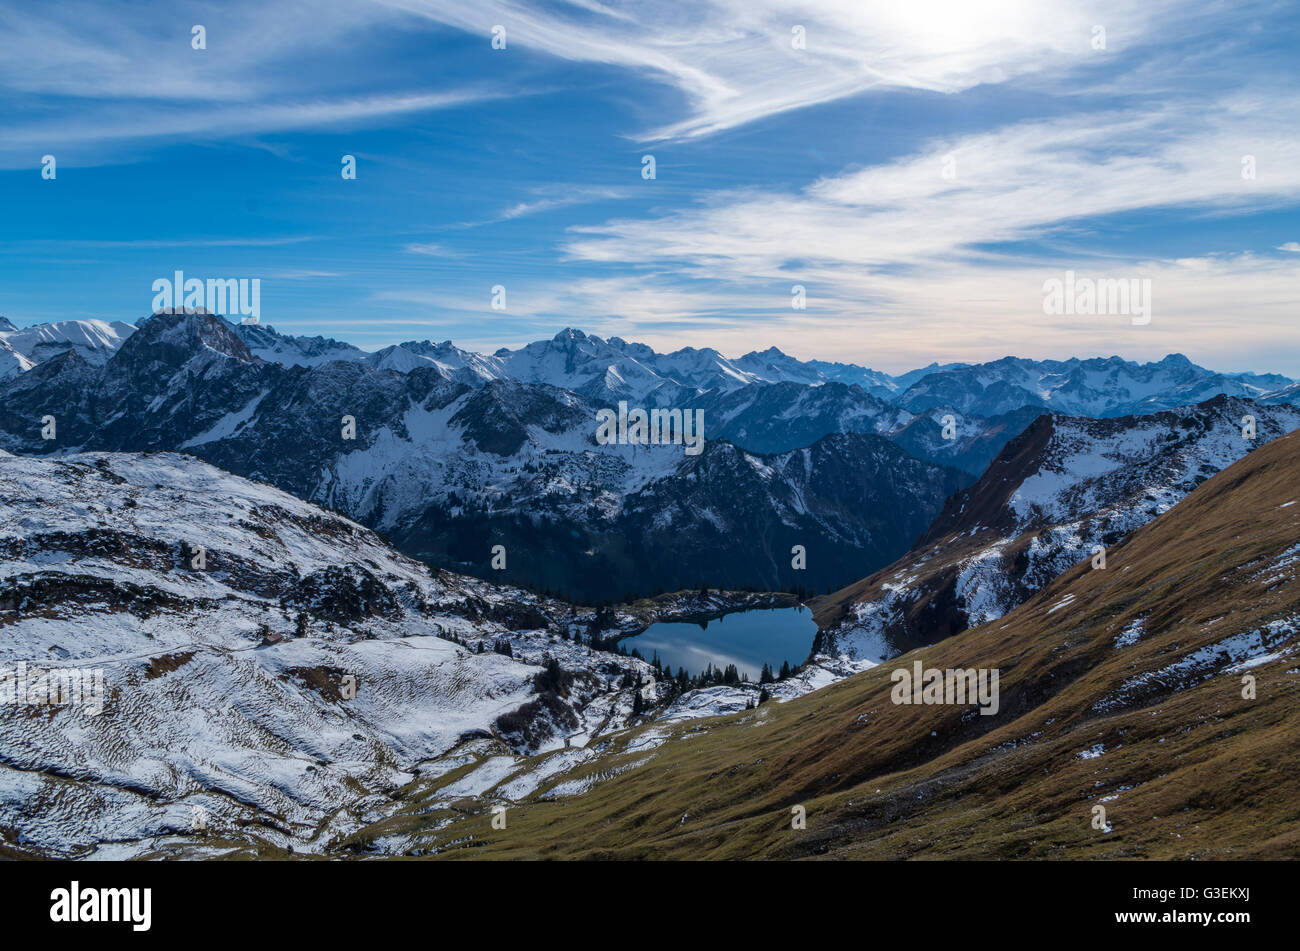 Lake Seealpsee in the mountain landscape of the Allgau Alps above of ...